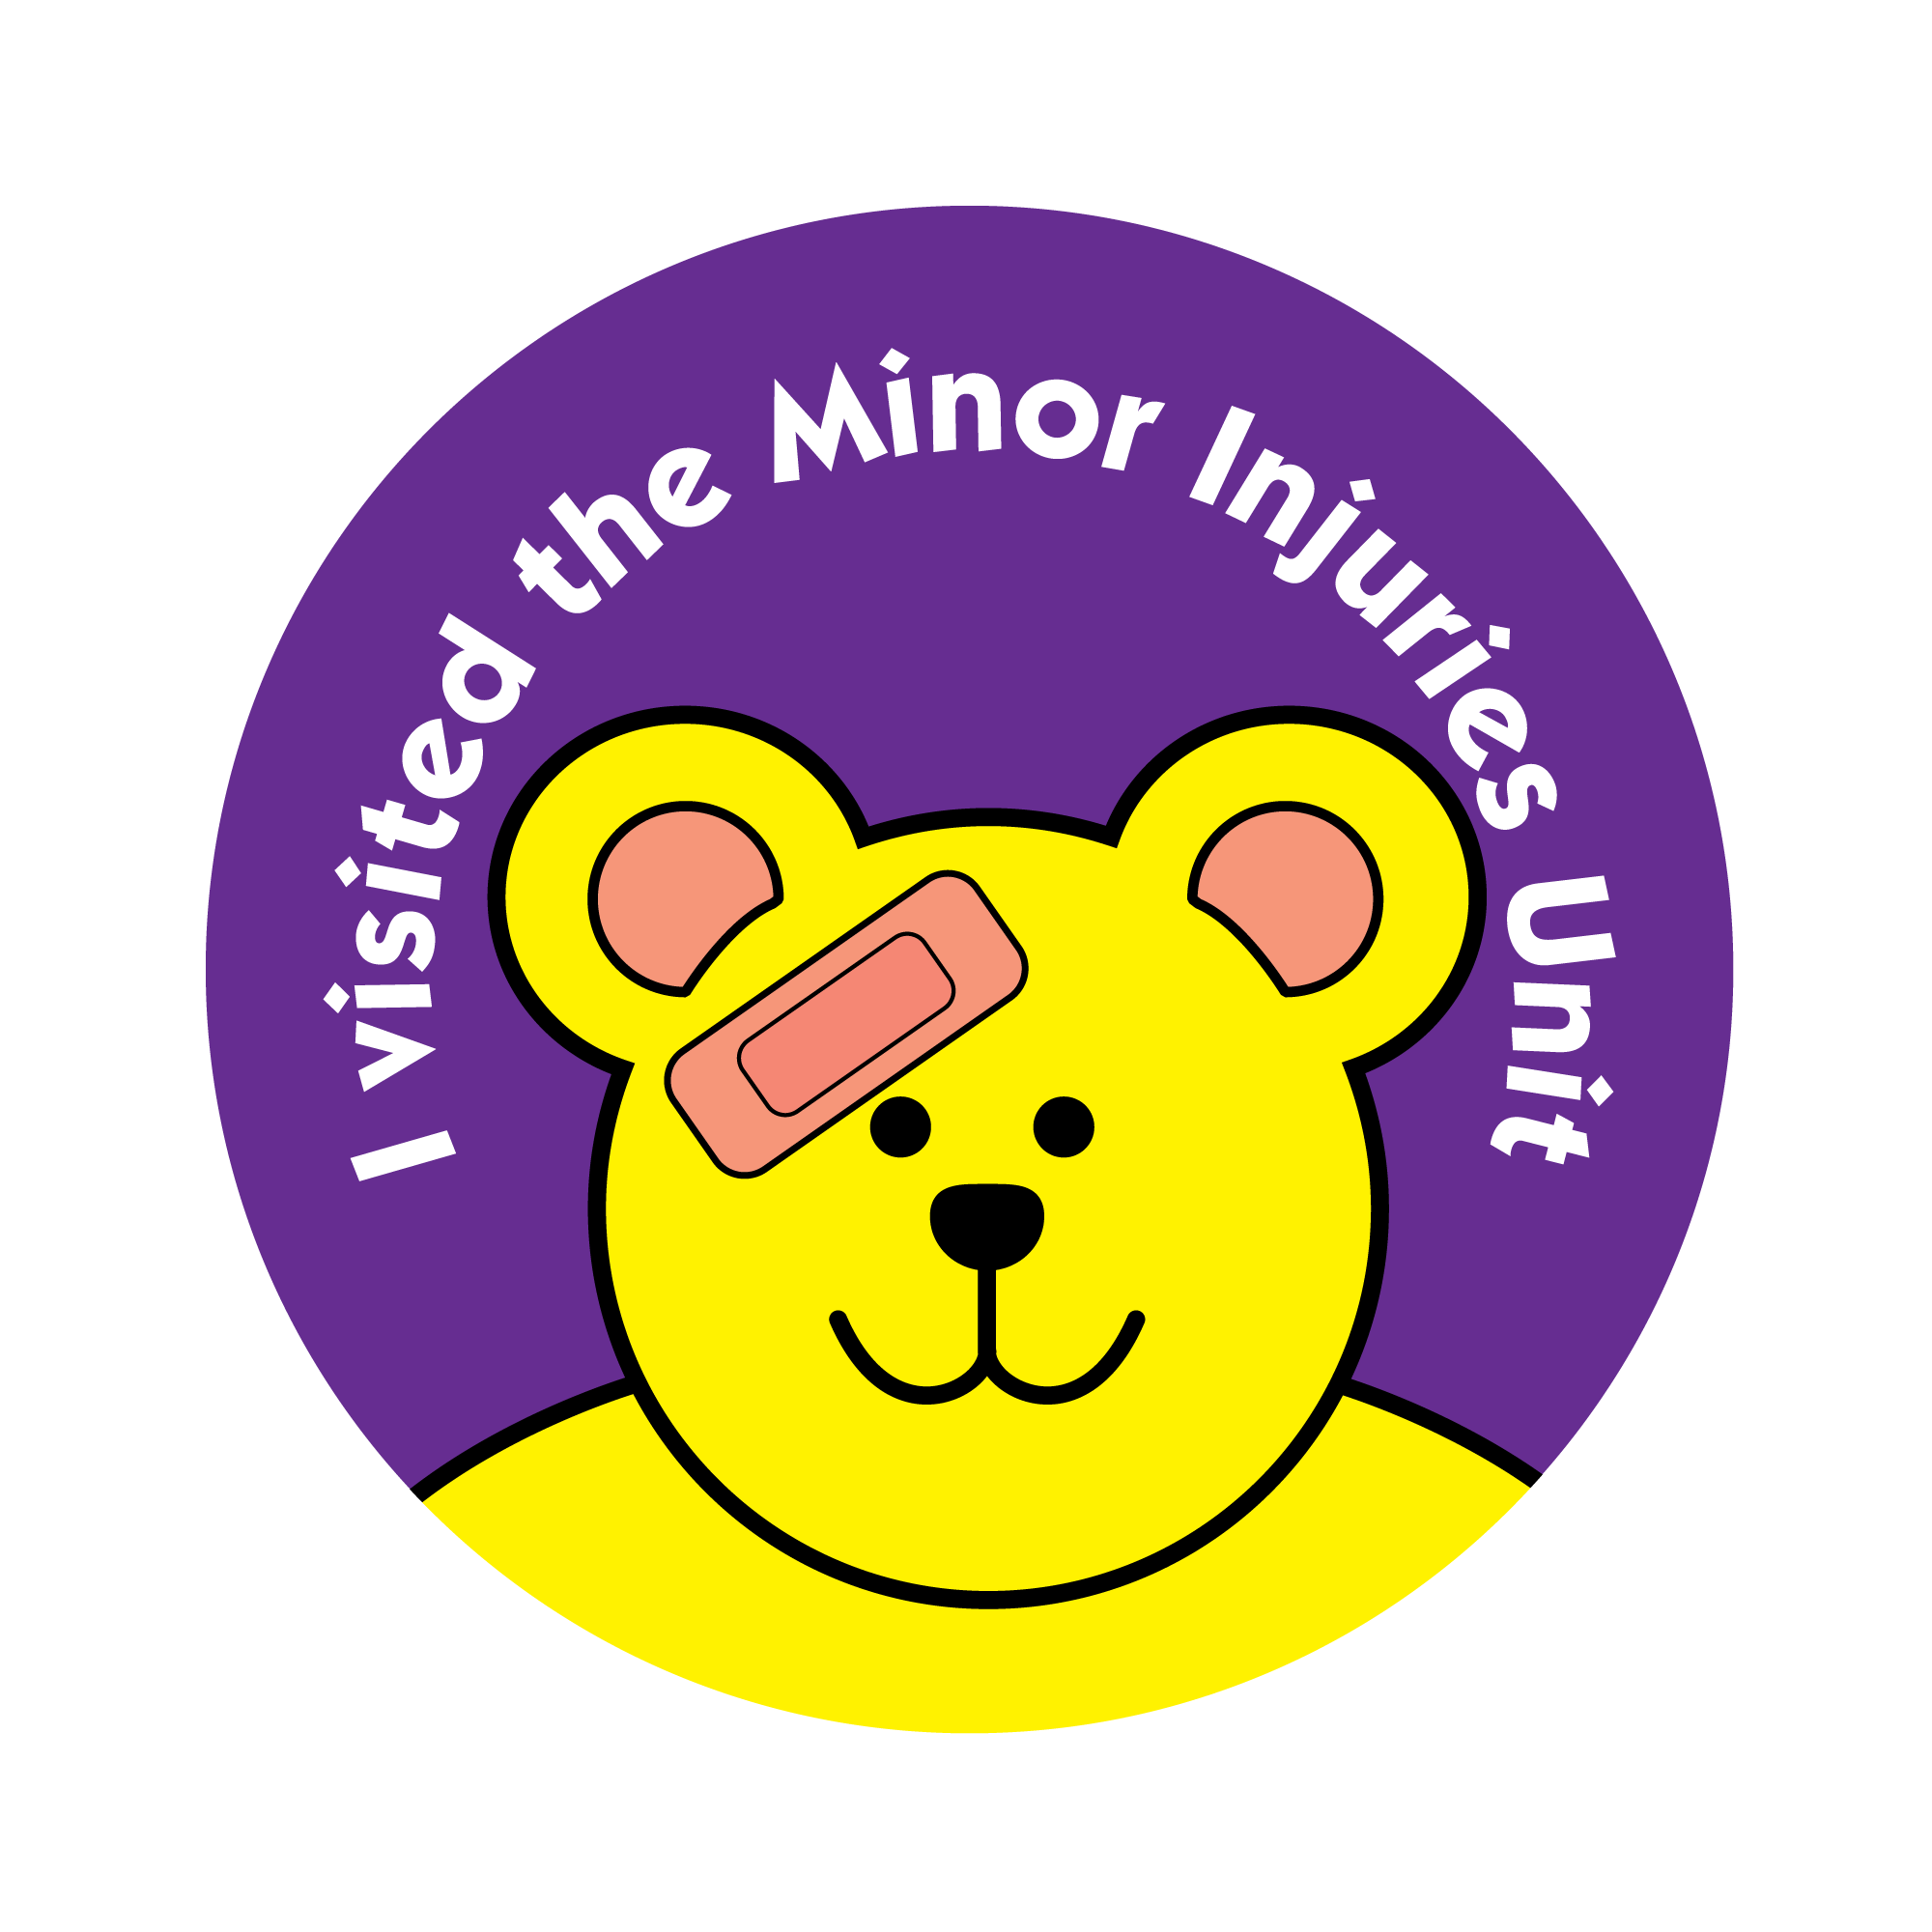 I visited the Minor Injuries Unit stickers